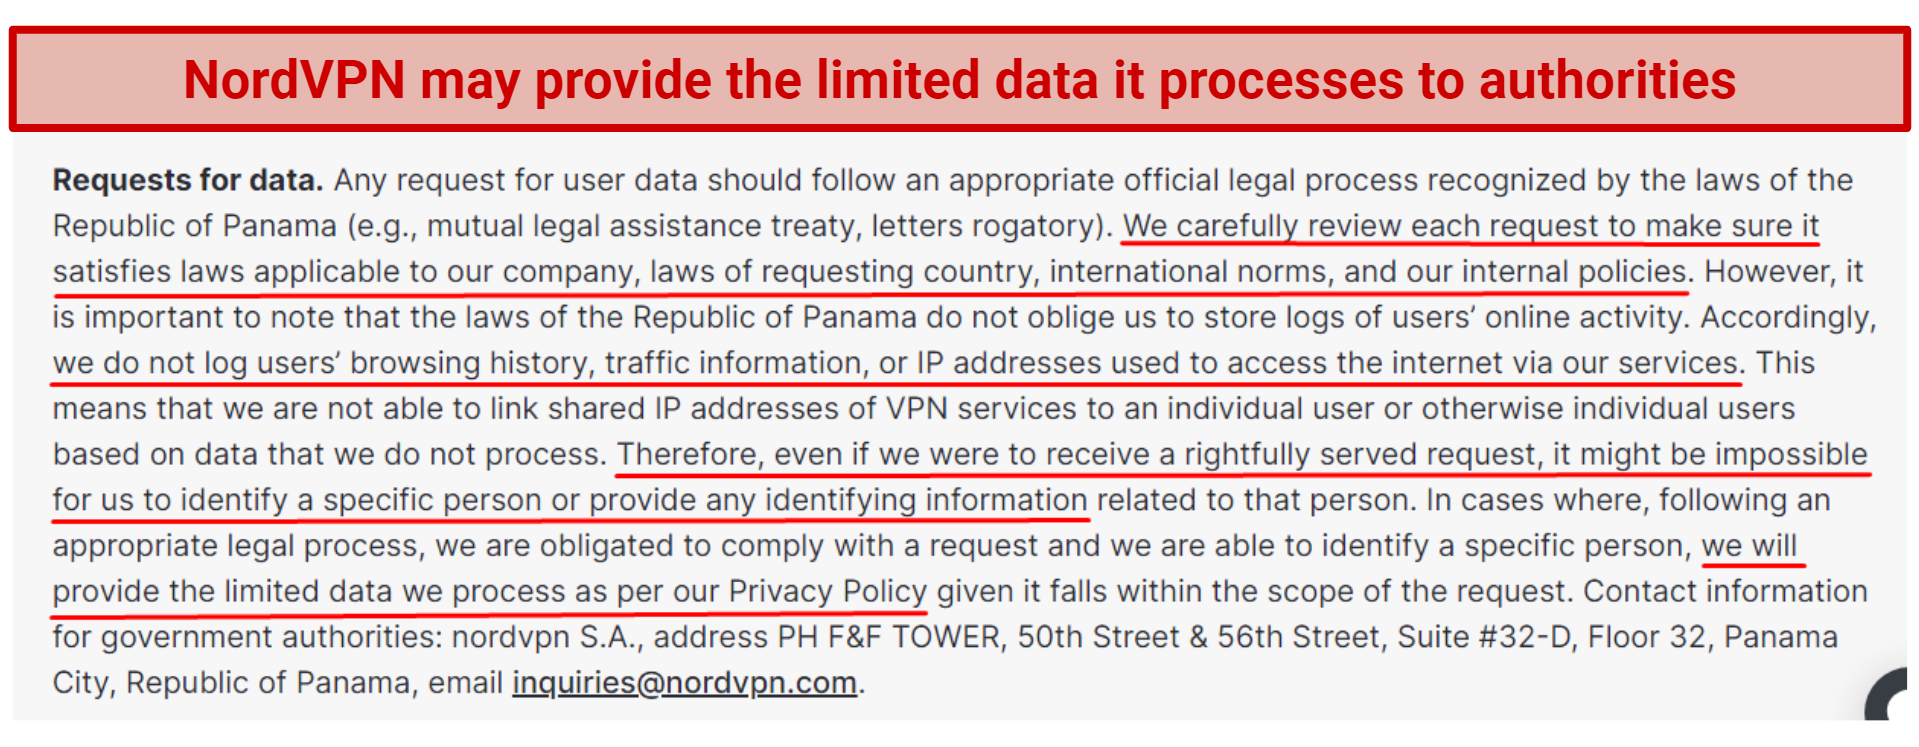 Exerpt from NordVPN's privacy policy stating that it may hand over the minimal data it processes if requested by authorities